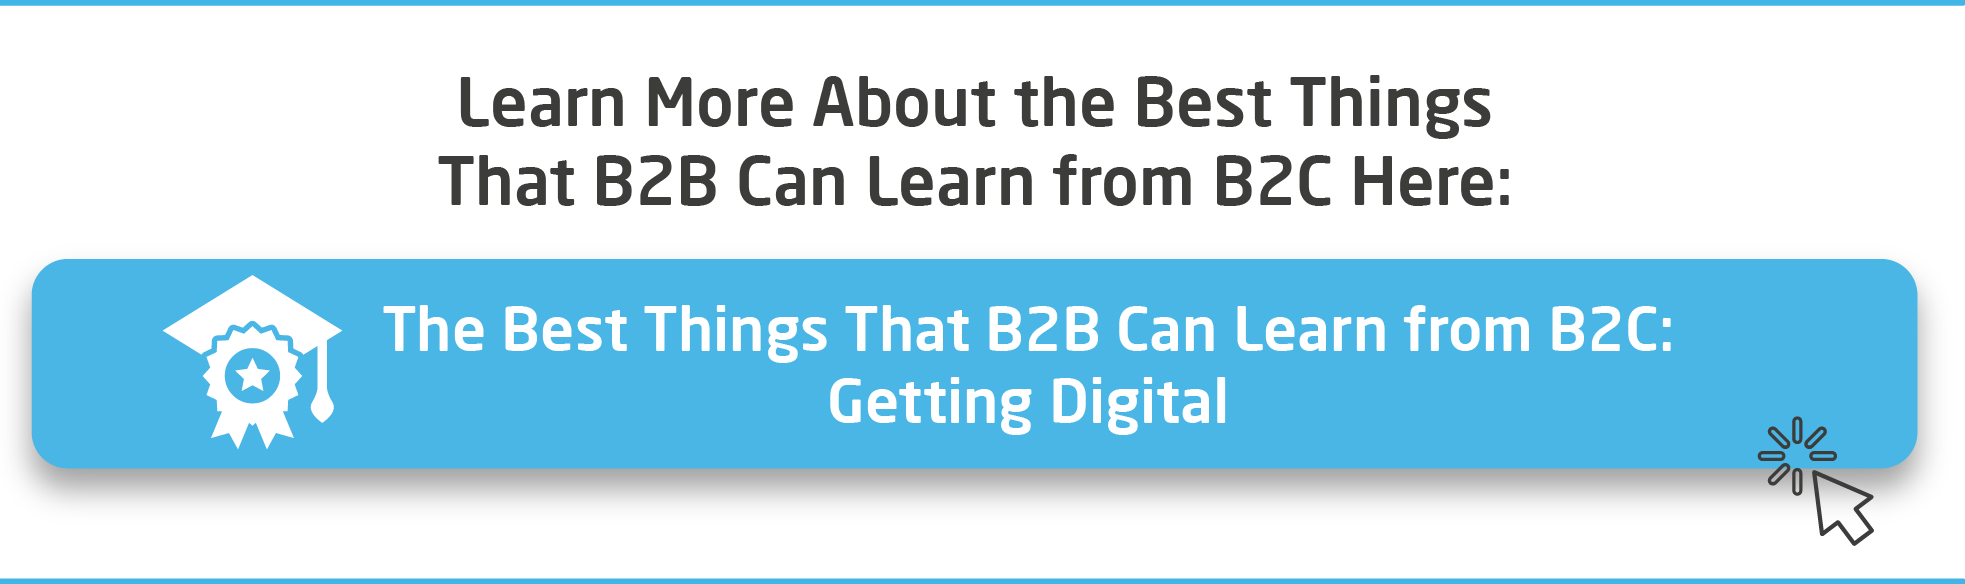 CTA-The-Best-Things-That-B2B-Can-Learn-From-B2C